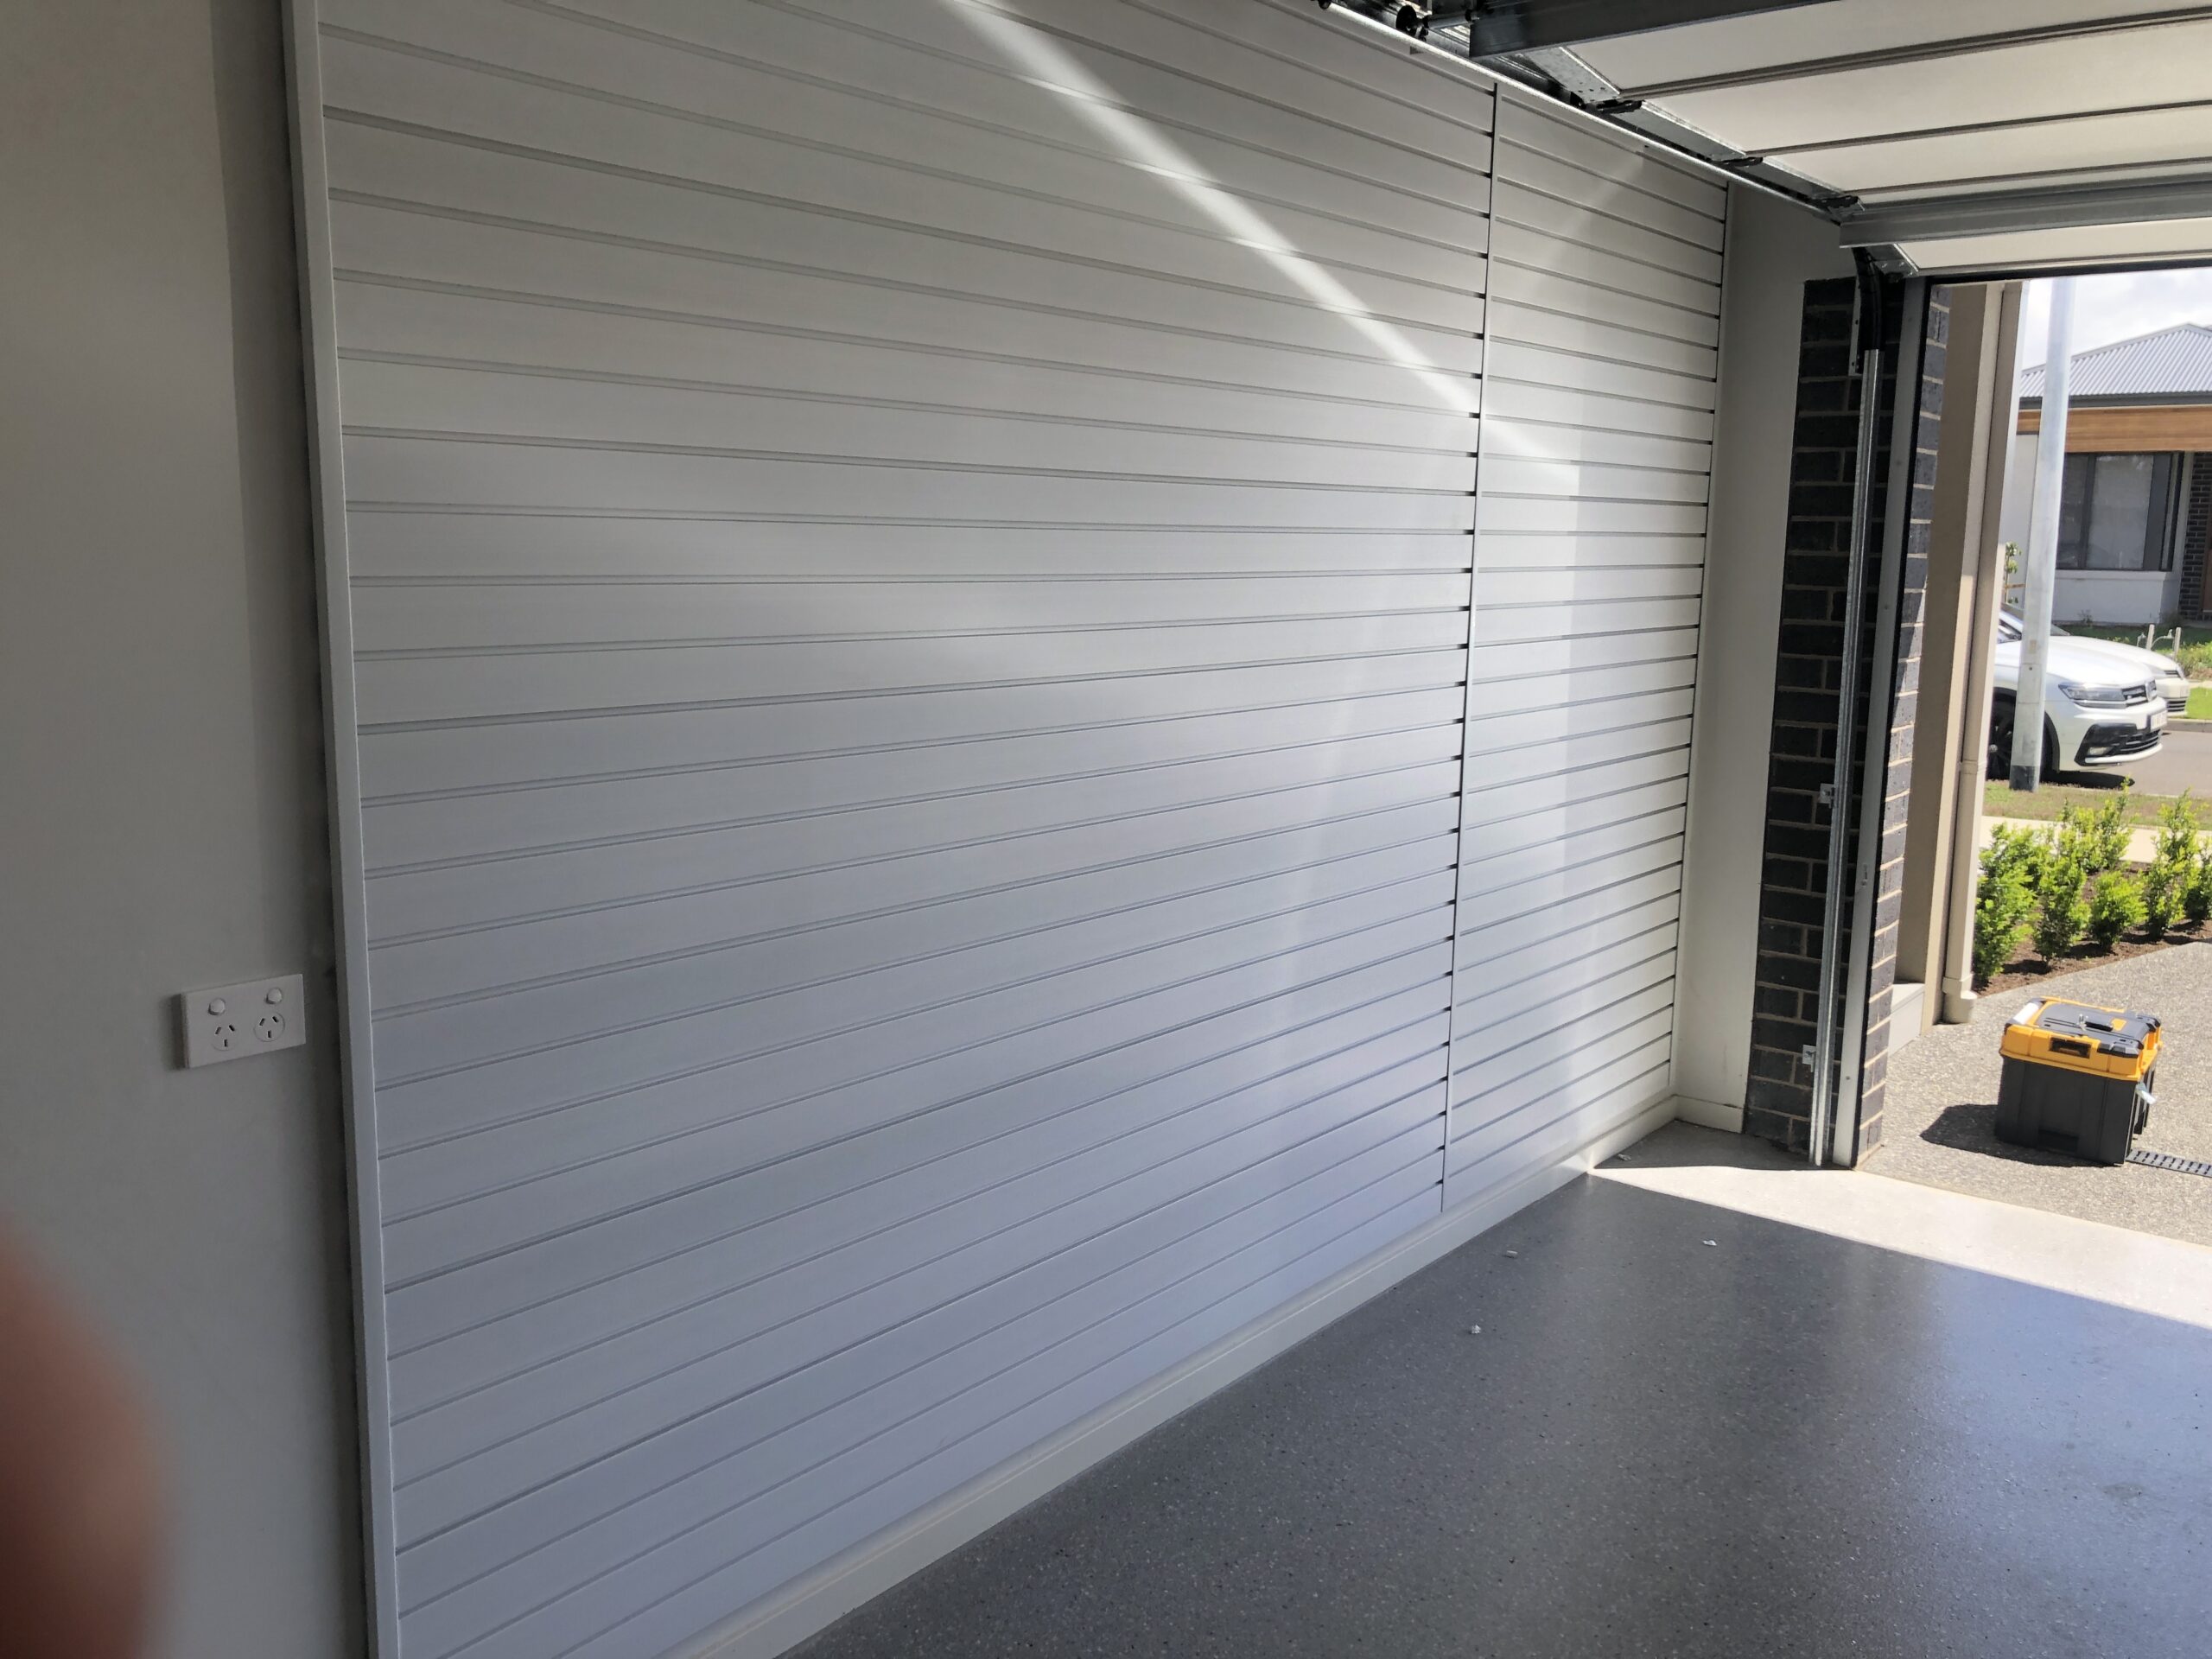 Securing Your Slatwall Panels